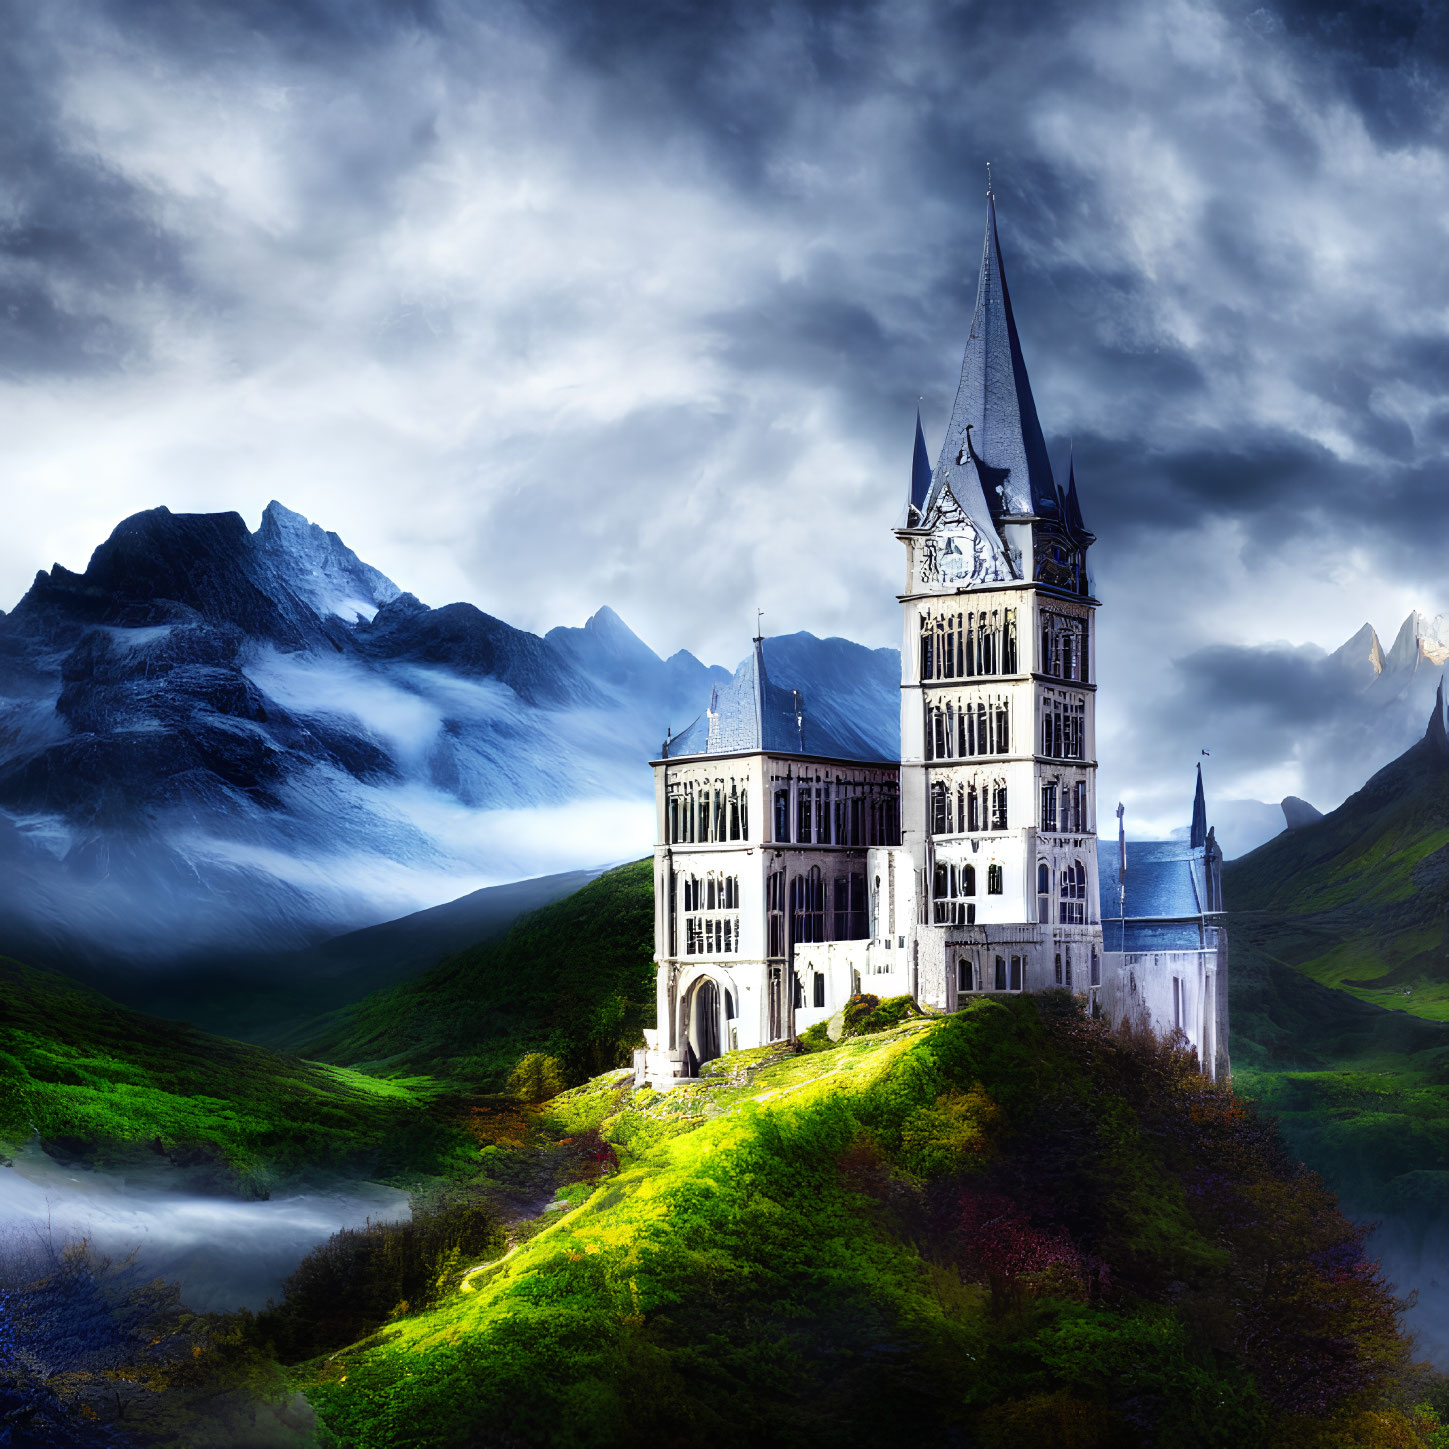 Majestic castle on lush green hill with mountains and dramatic sky